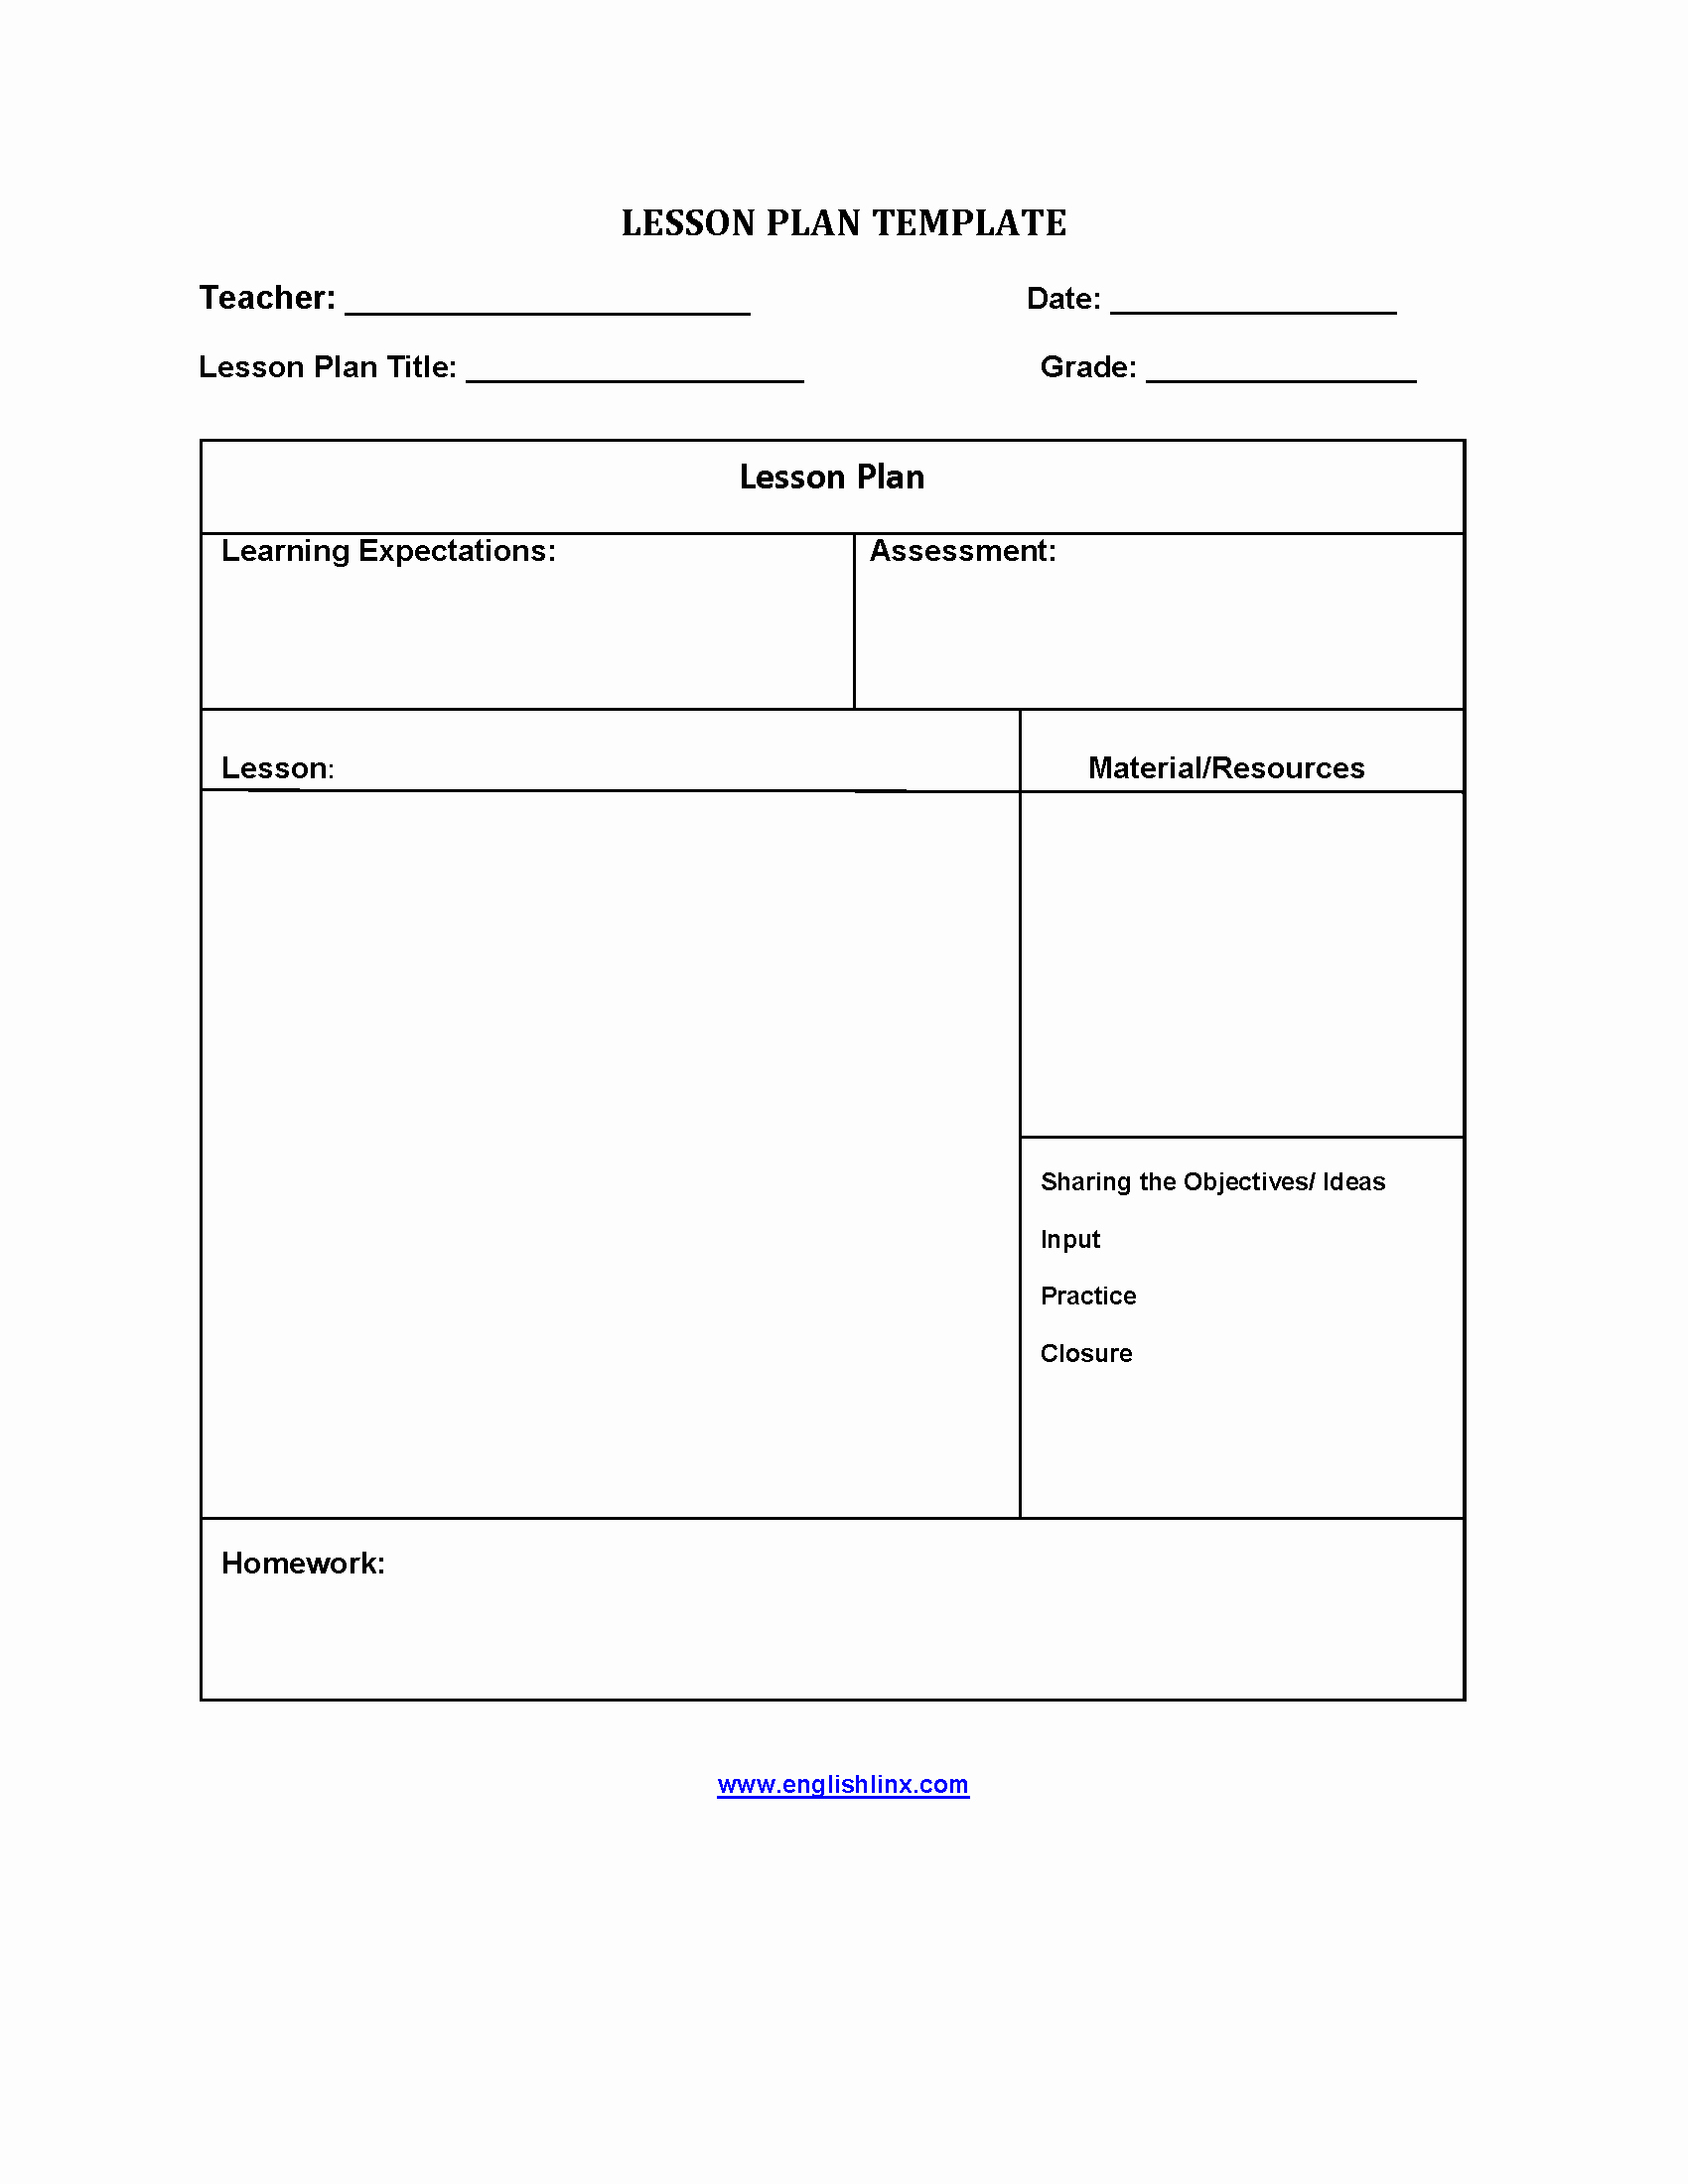 5 Step Lesson Plan Template New Lesson Plan Template